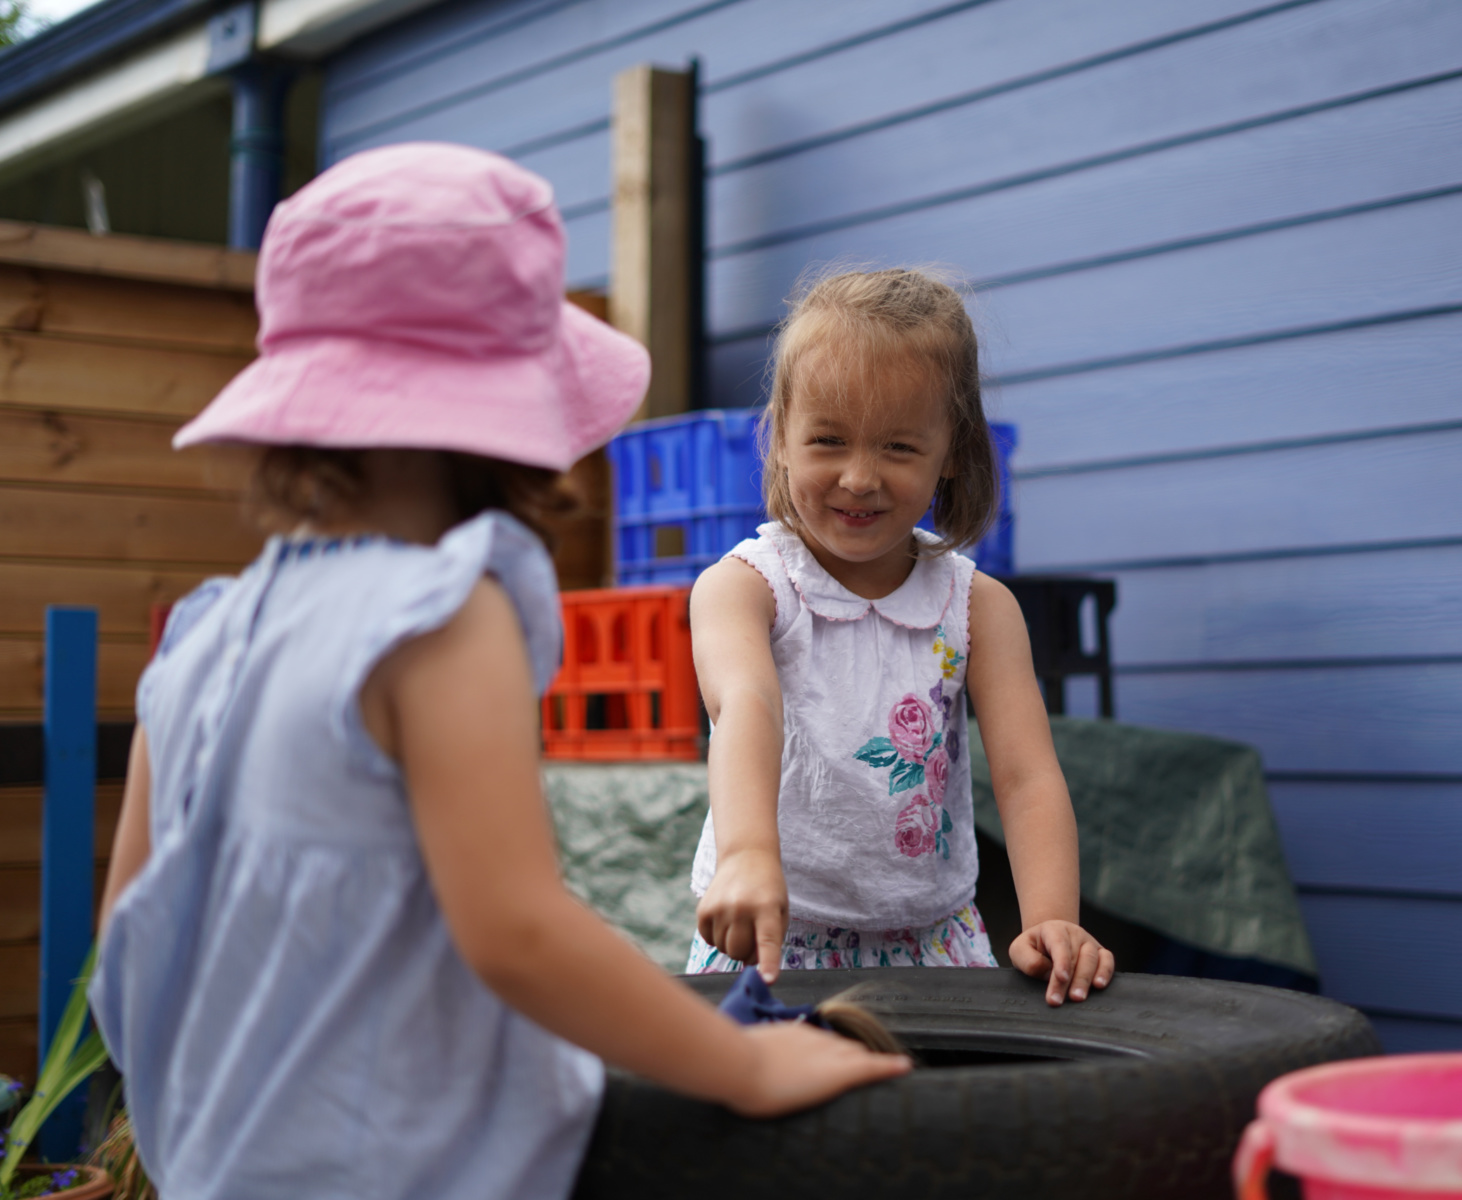 Two young Nursery-aged girls are pictured outdoors on the academy grounds, smiling at one another. One of the girls is seen pointing to something inside a car tyre.